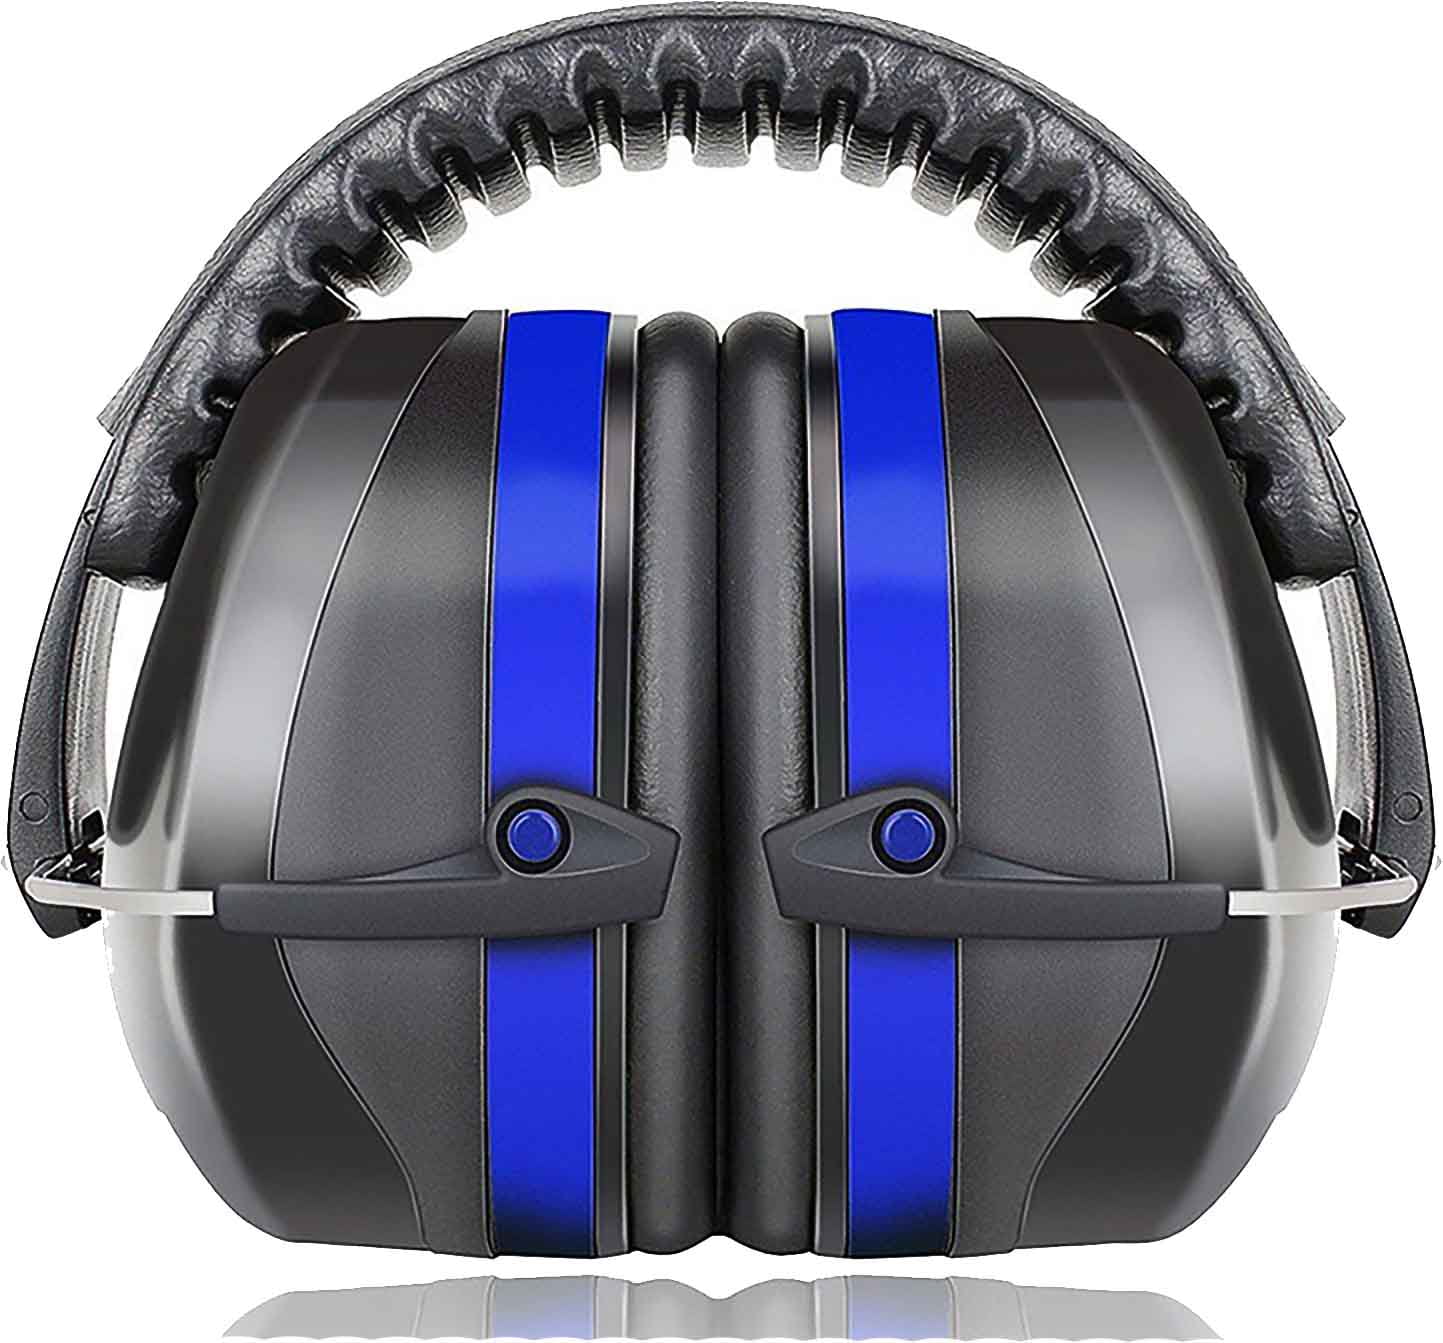 ClearArmor 34db 141001 Shooters Hearing Protection Safety Ear Muffs for sale online 